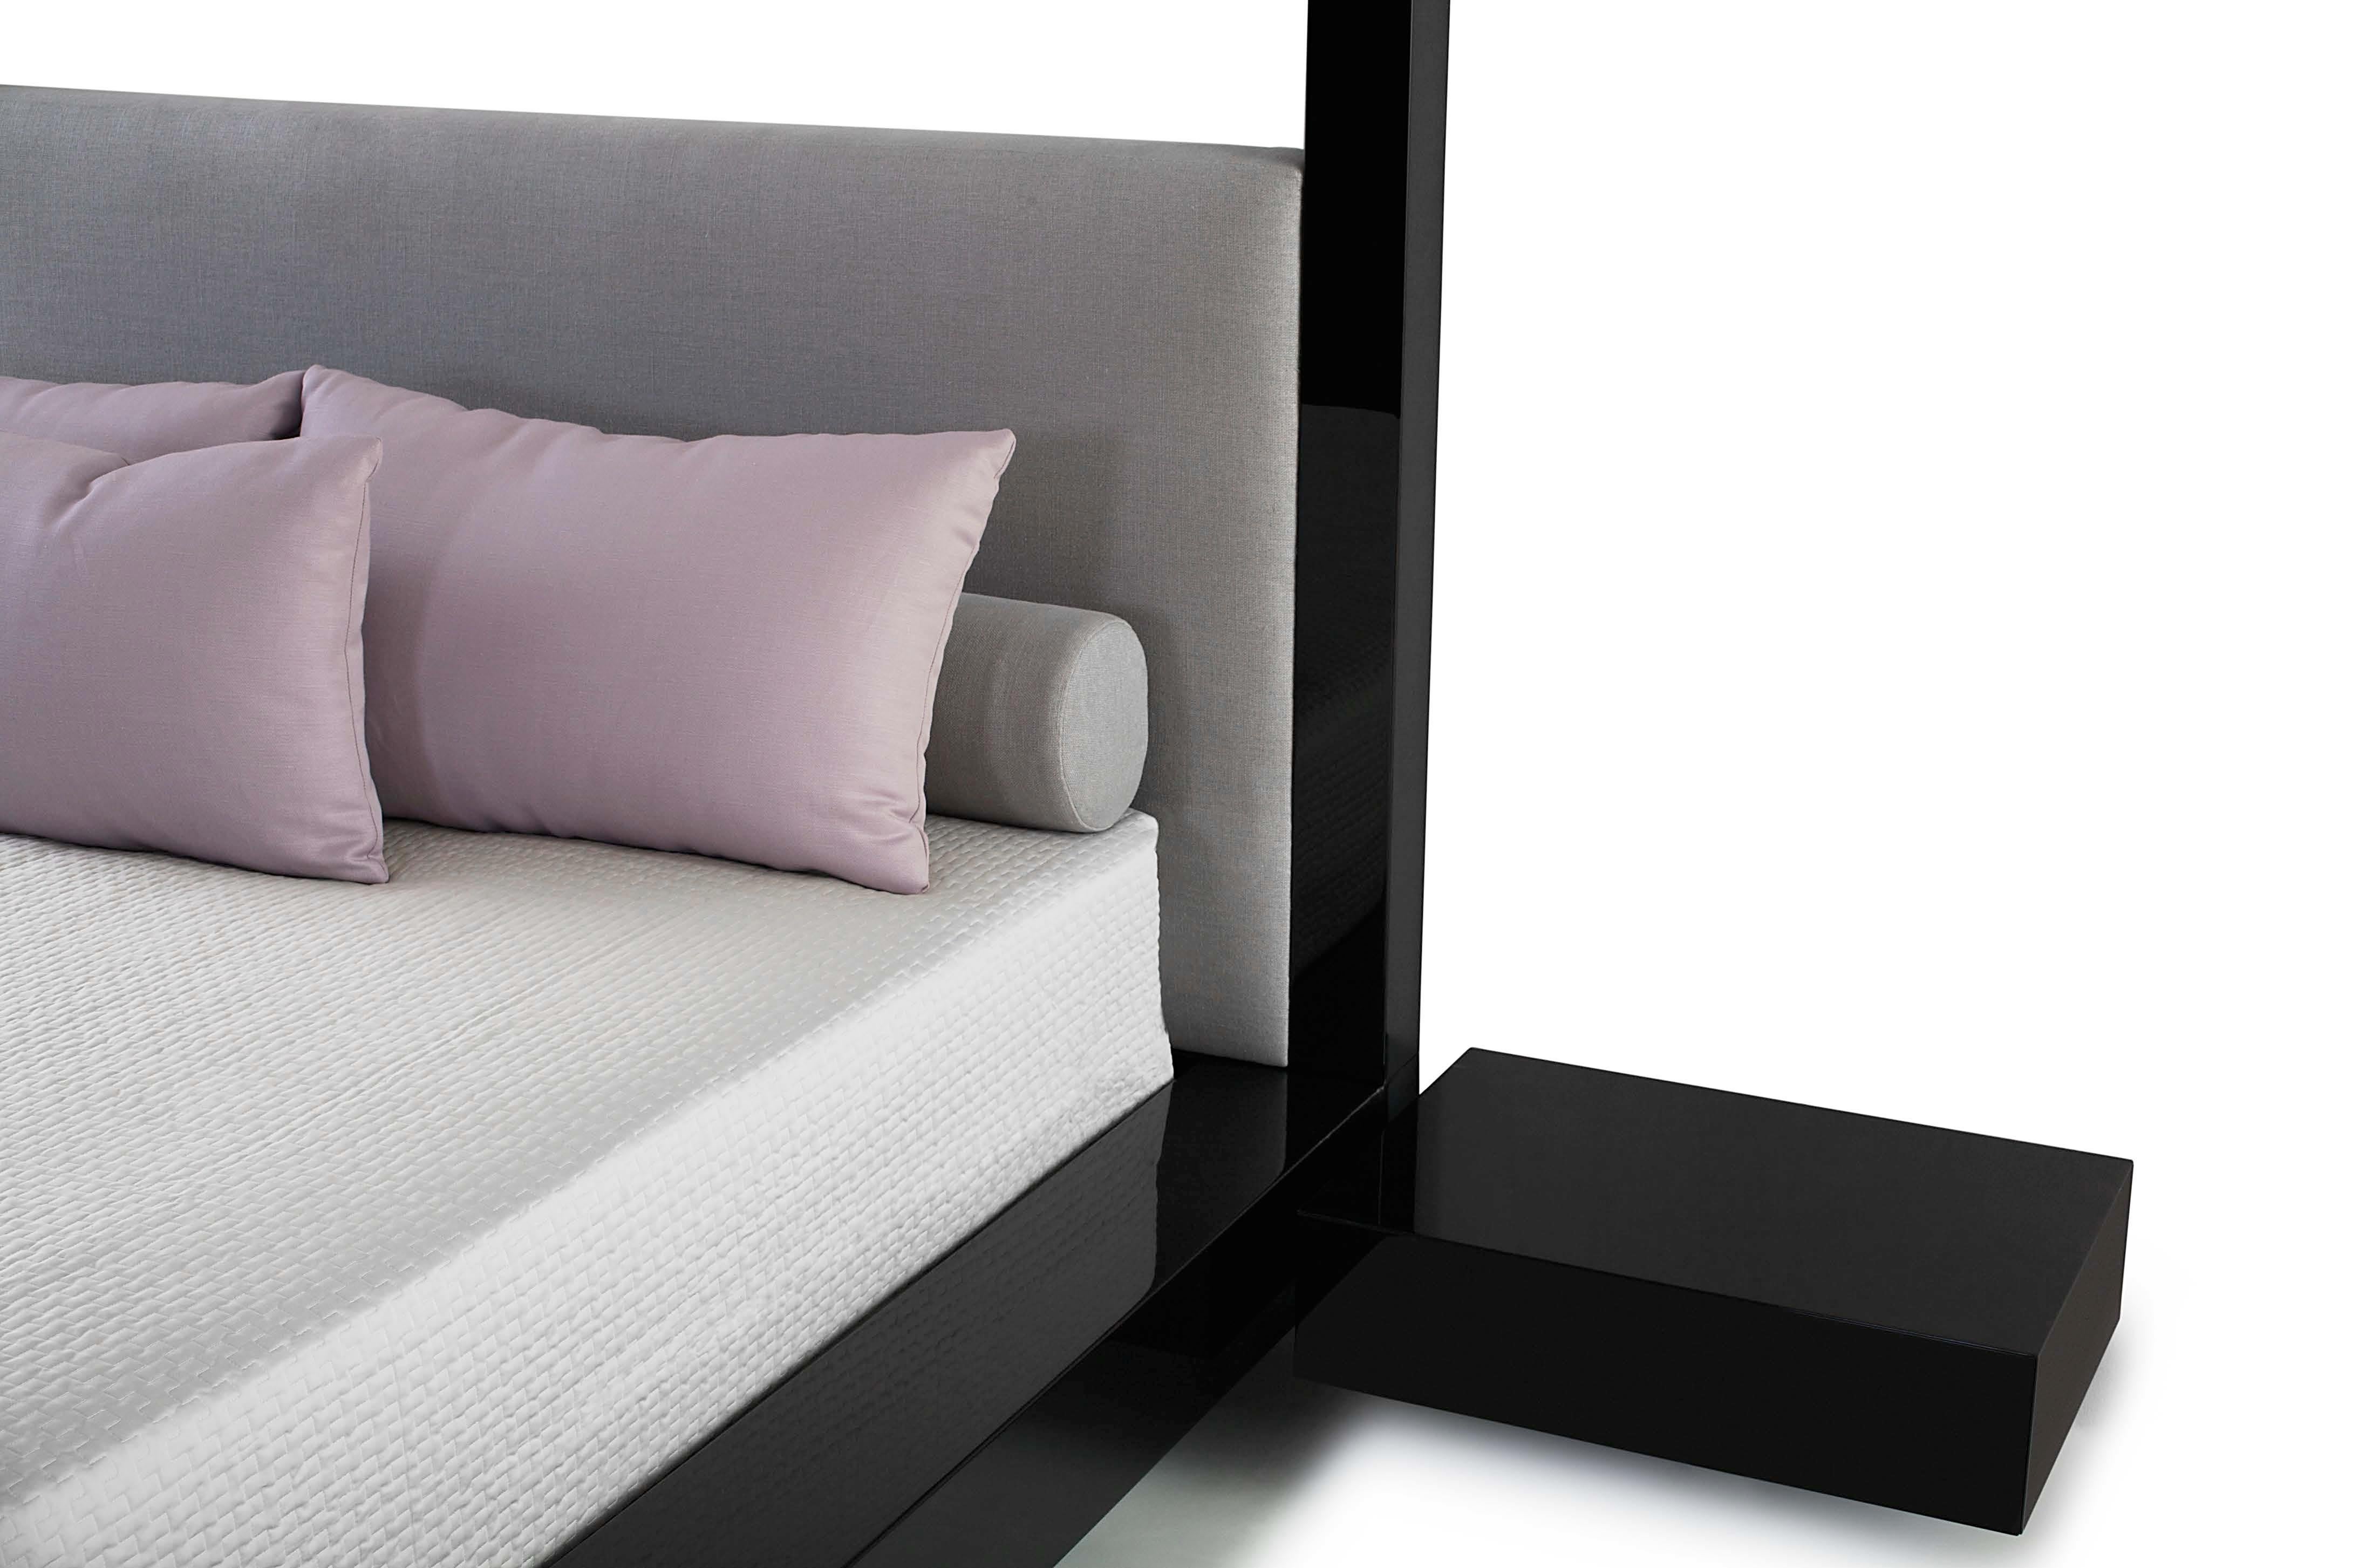 Boasting grand and spectacular dimensions, the flagship Plaza bed is a modern yet not overstated take on Classic four-post luxury. A focal point for any space, it is the pinnacle of sophistication and elegance.

Floating Plaza Nightstands are sold